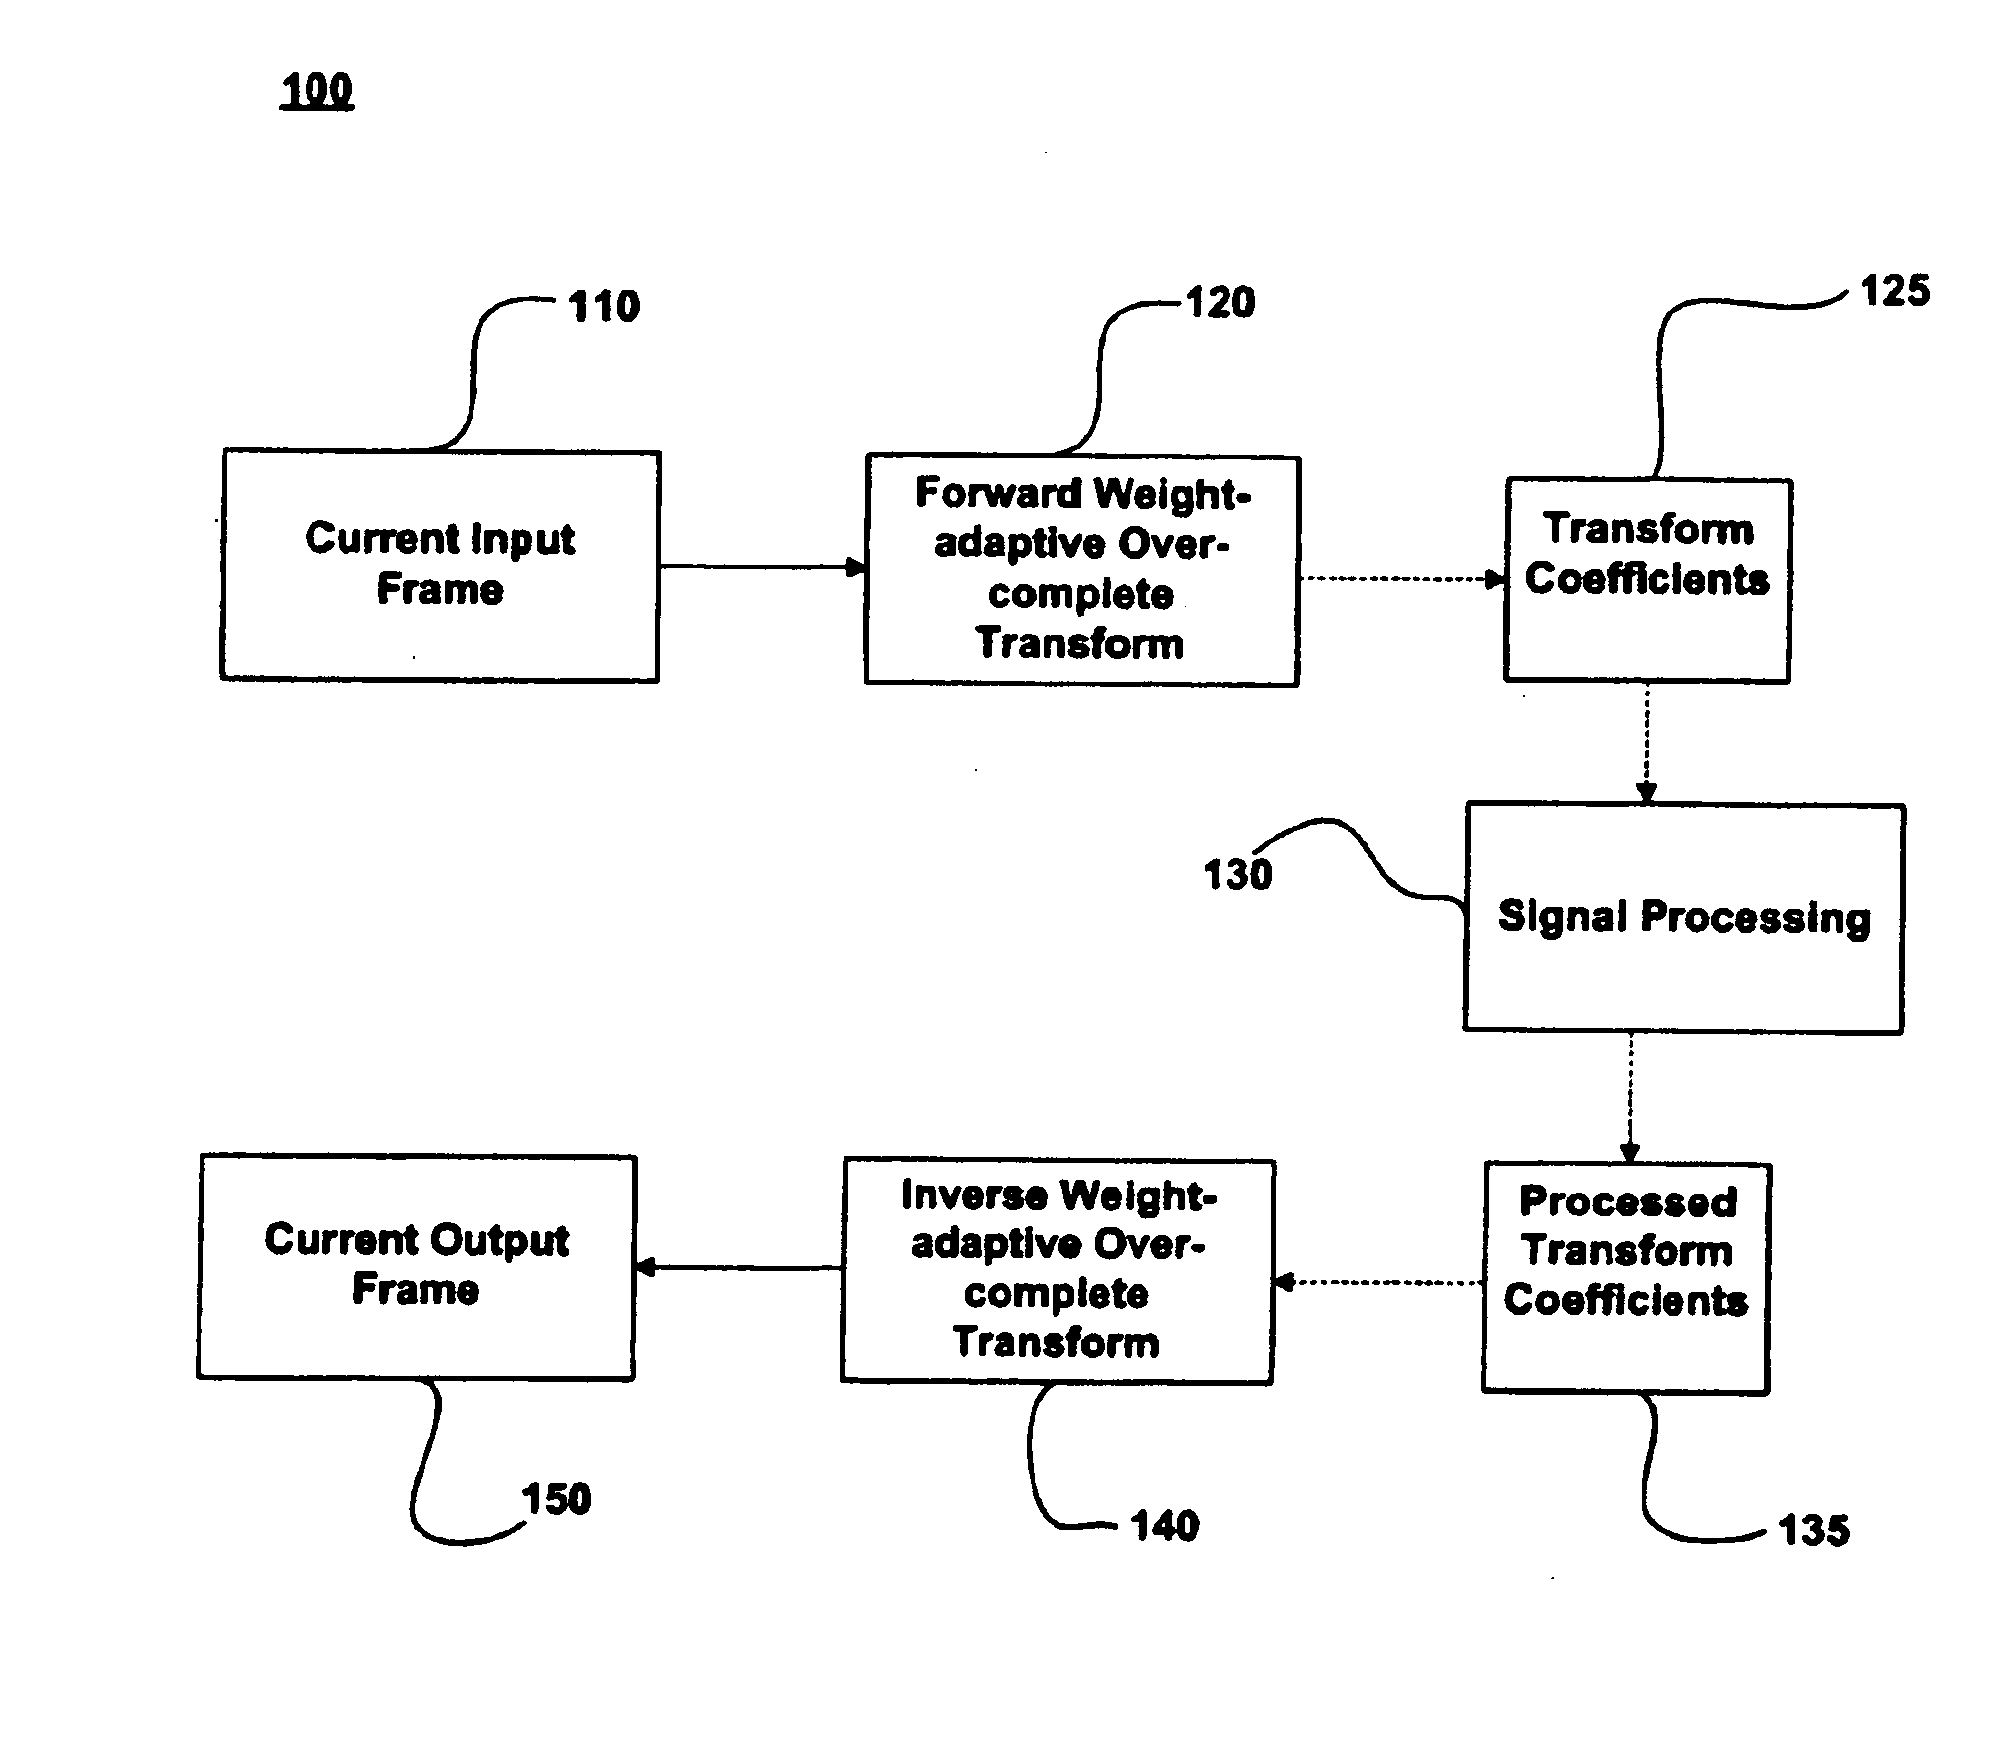 Methods for fast and memory efficient implementation of transforms